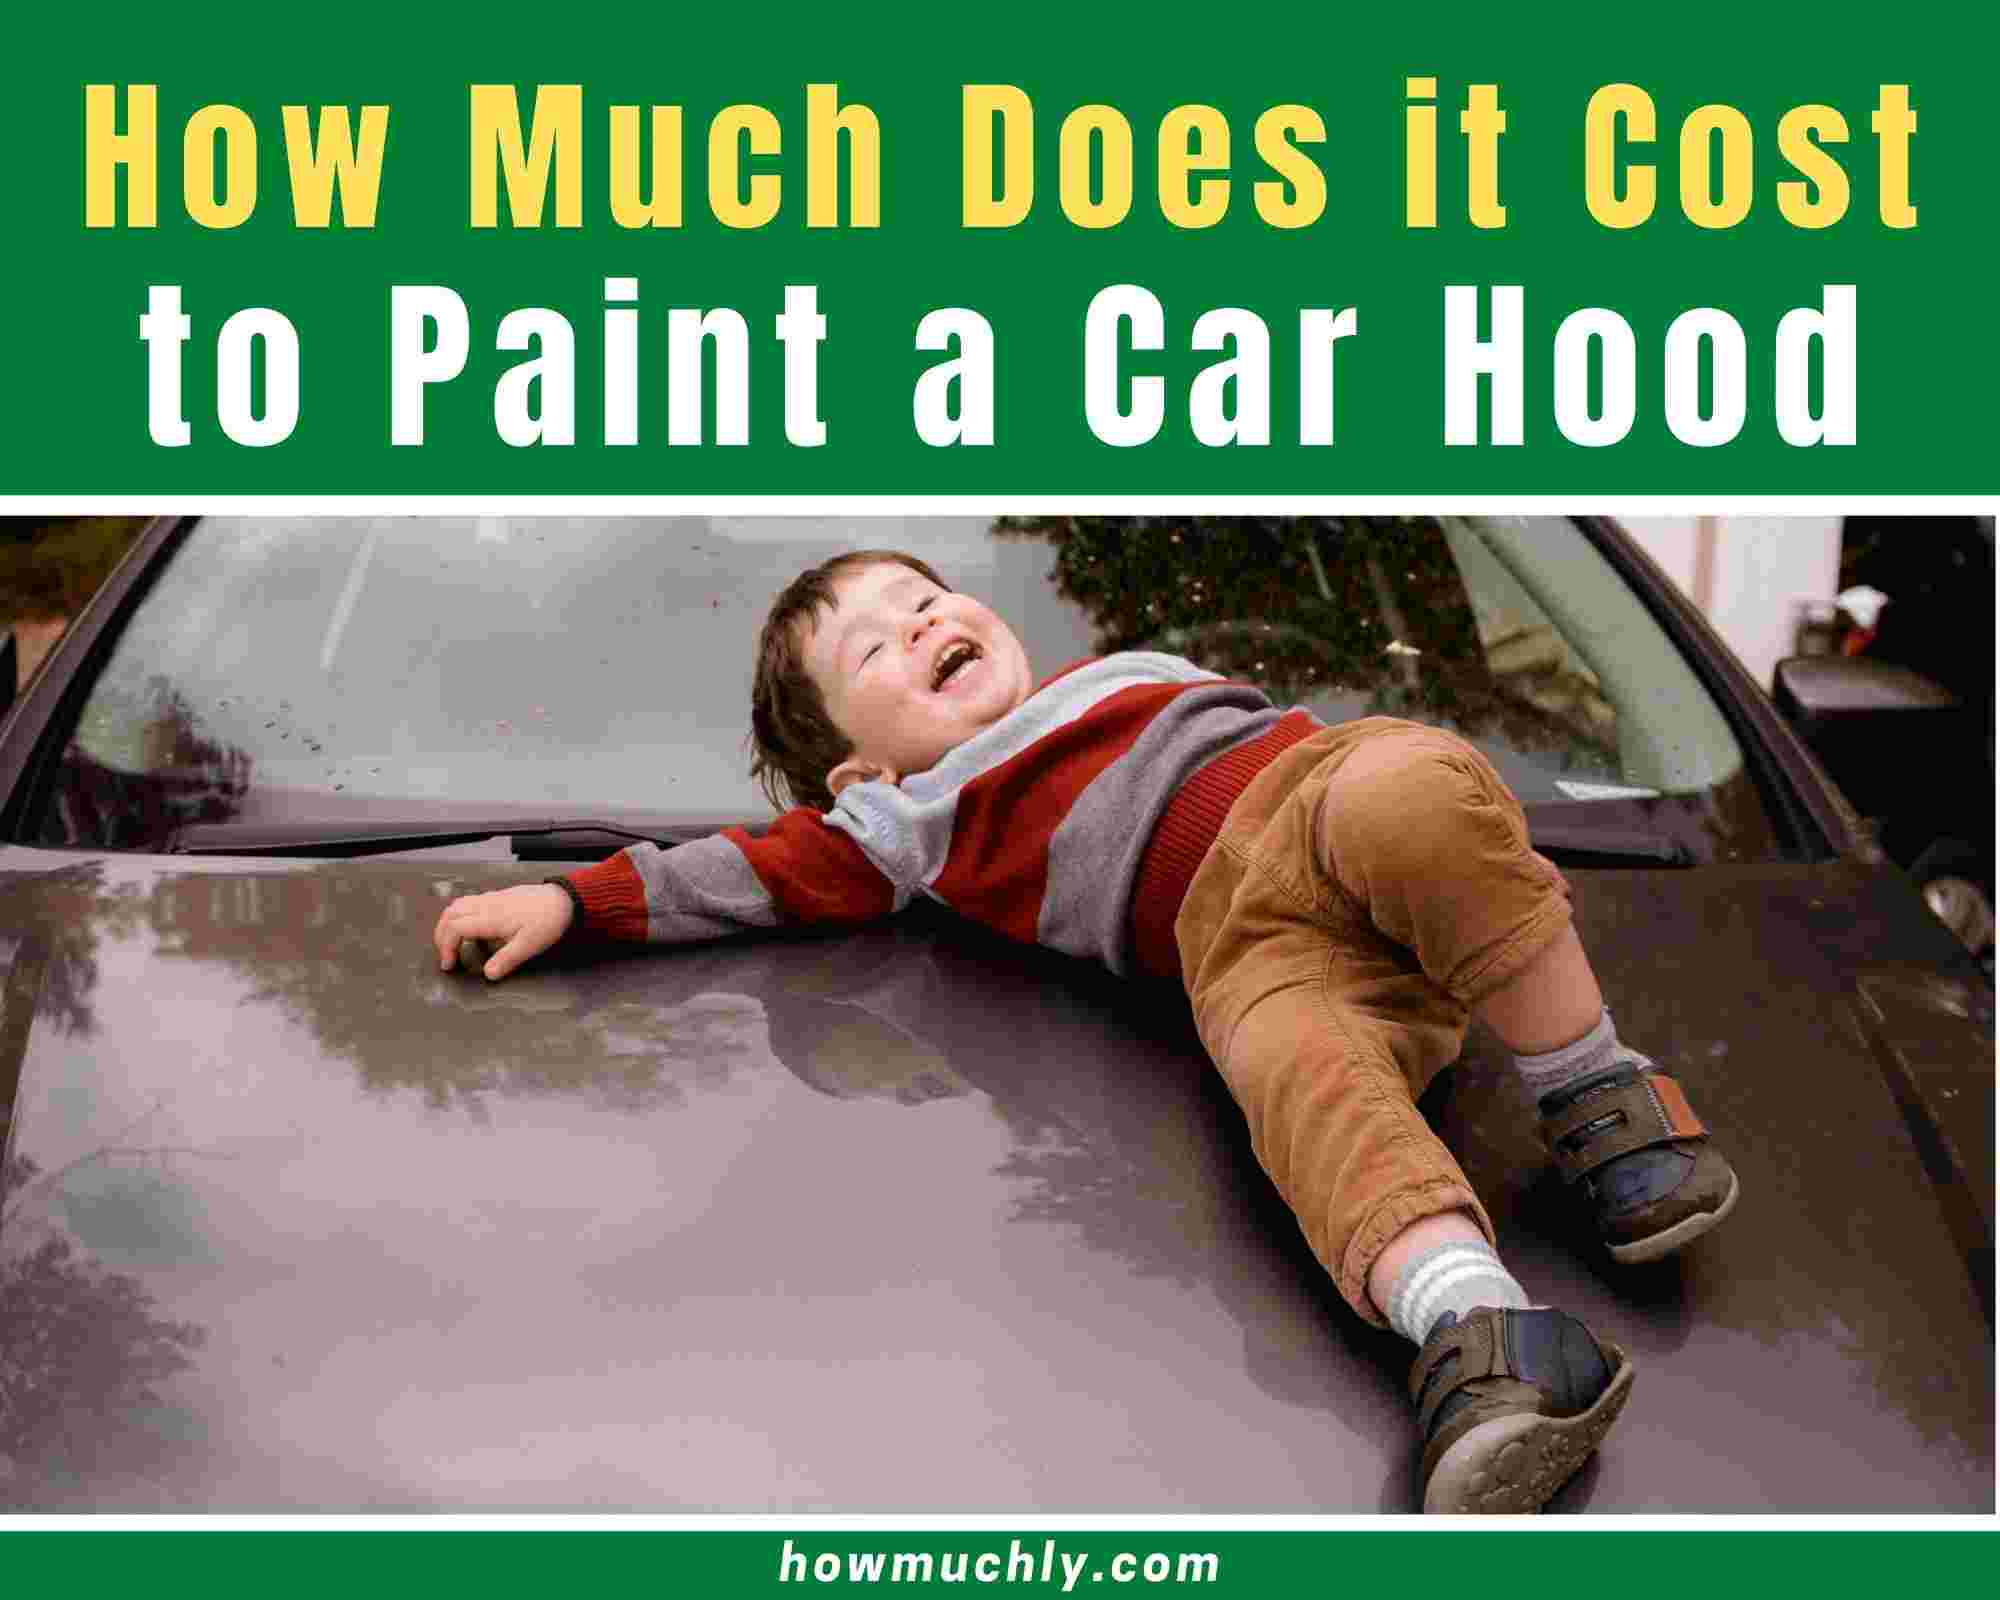 How Much Does it Cost to Paint a Car Hood? [2022 Updated]